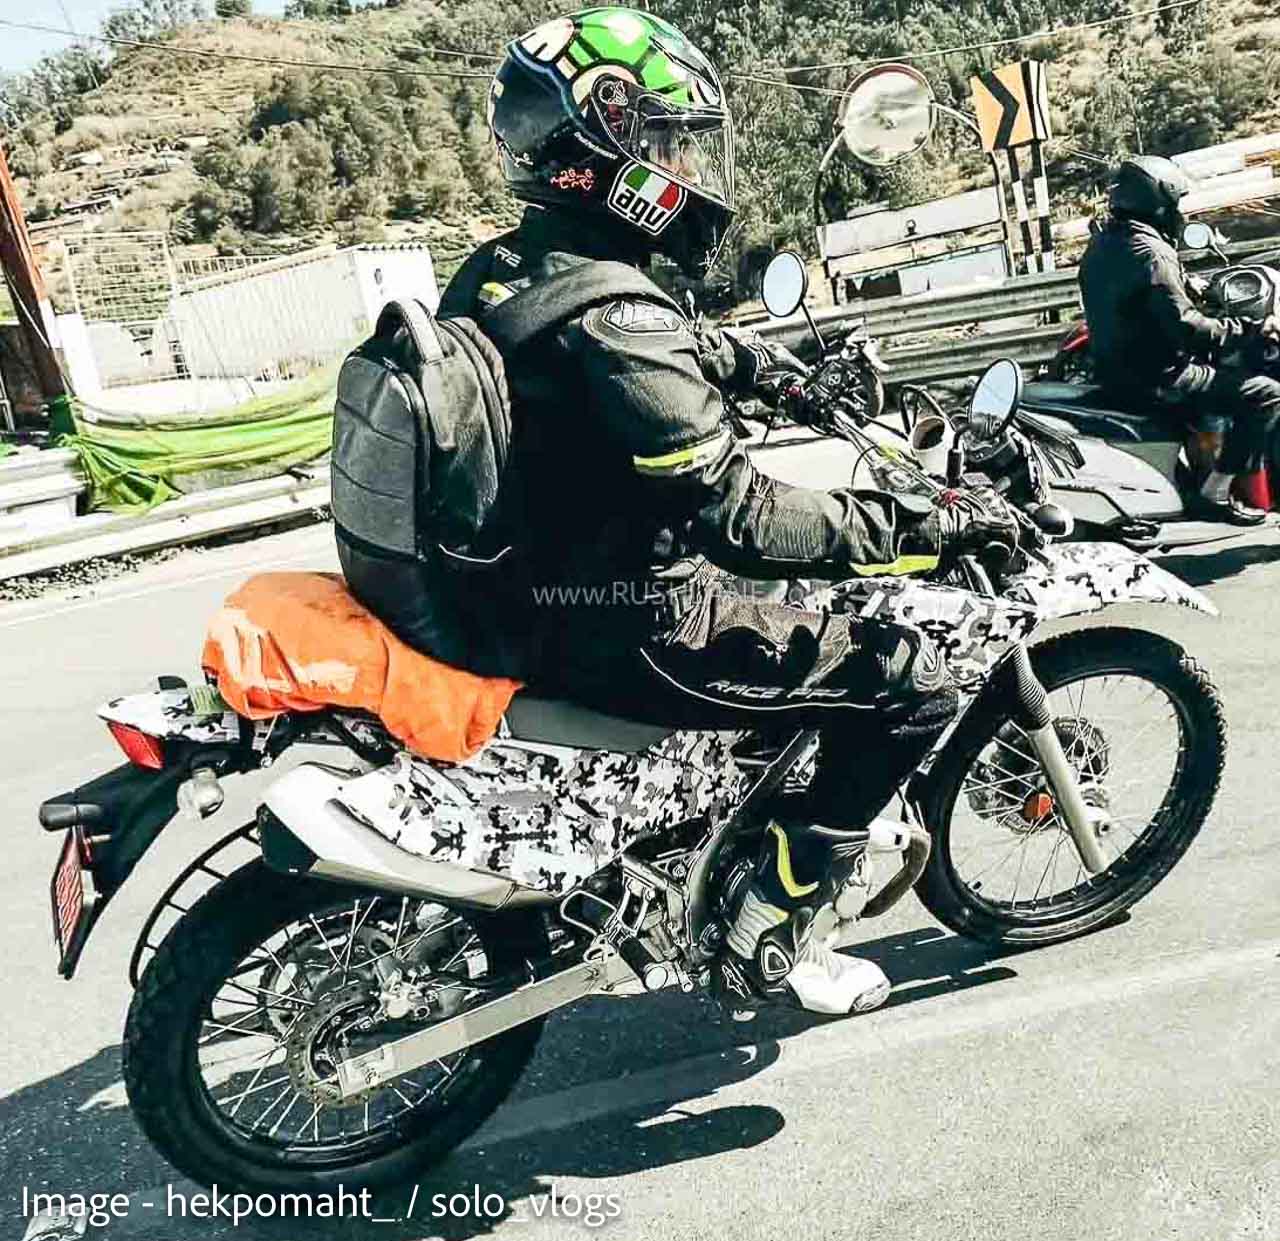 Yamaha ADV Motorcycle Spied - Ground Clearance